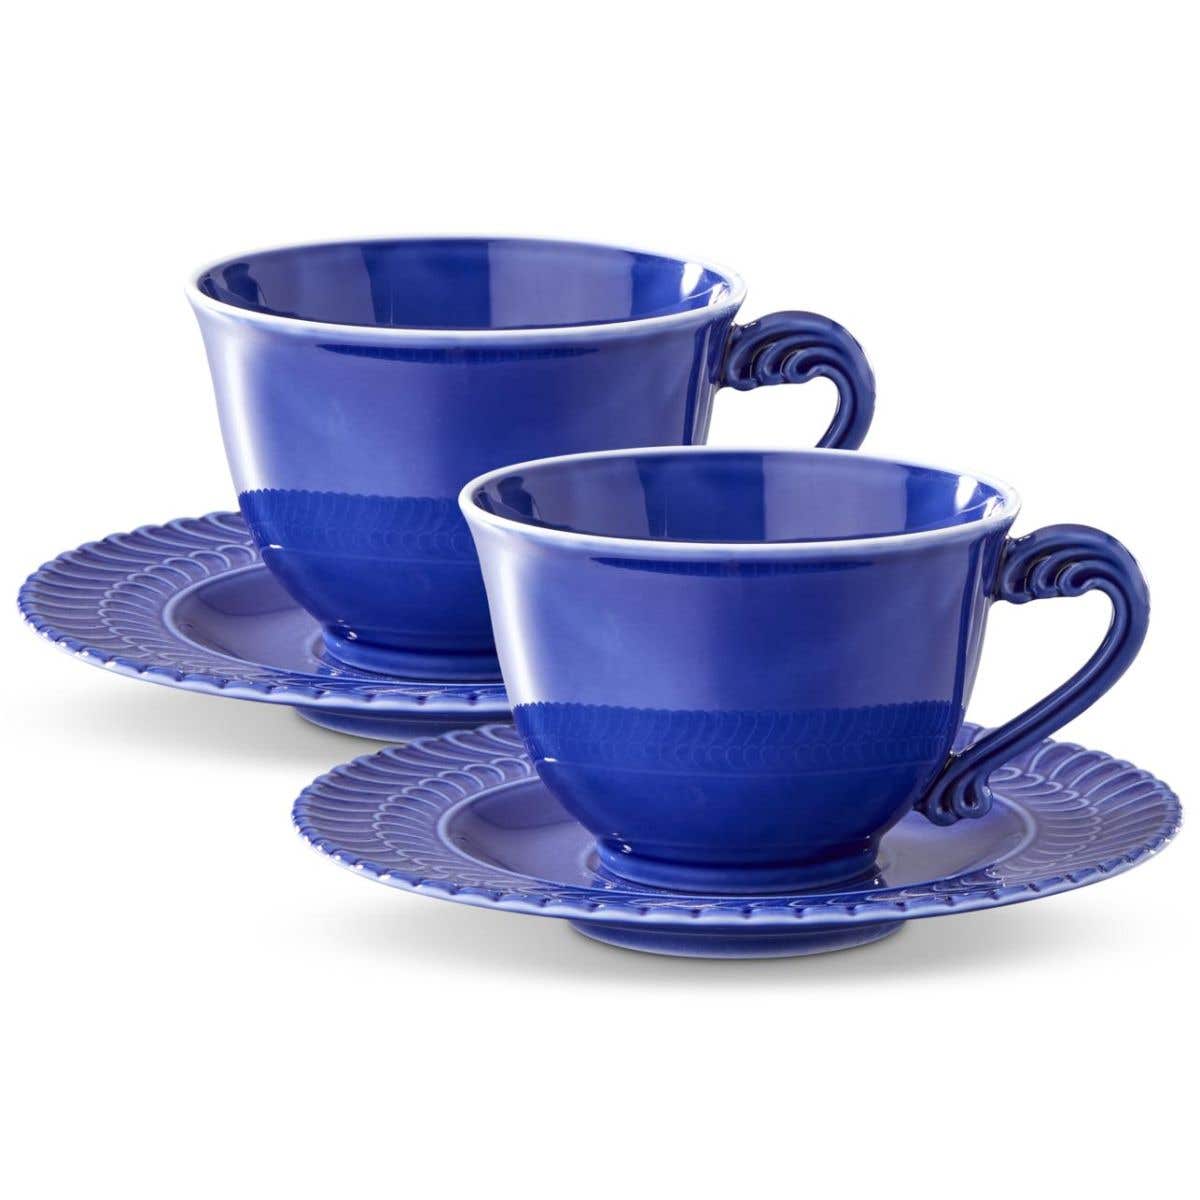 DOUBLE ROUCHE - FLORENCE FURNACE TEA CUP